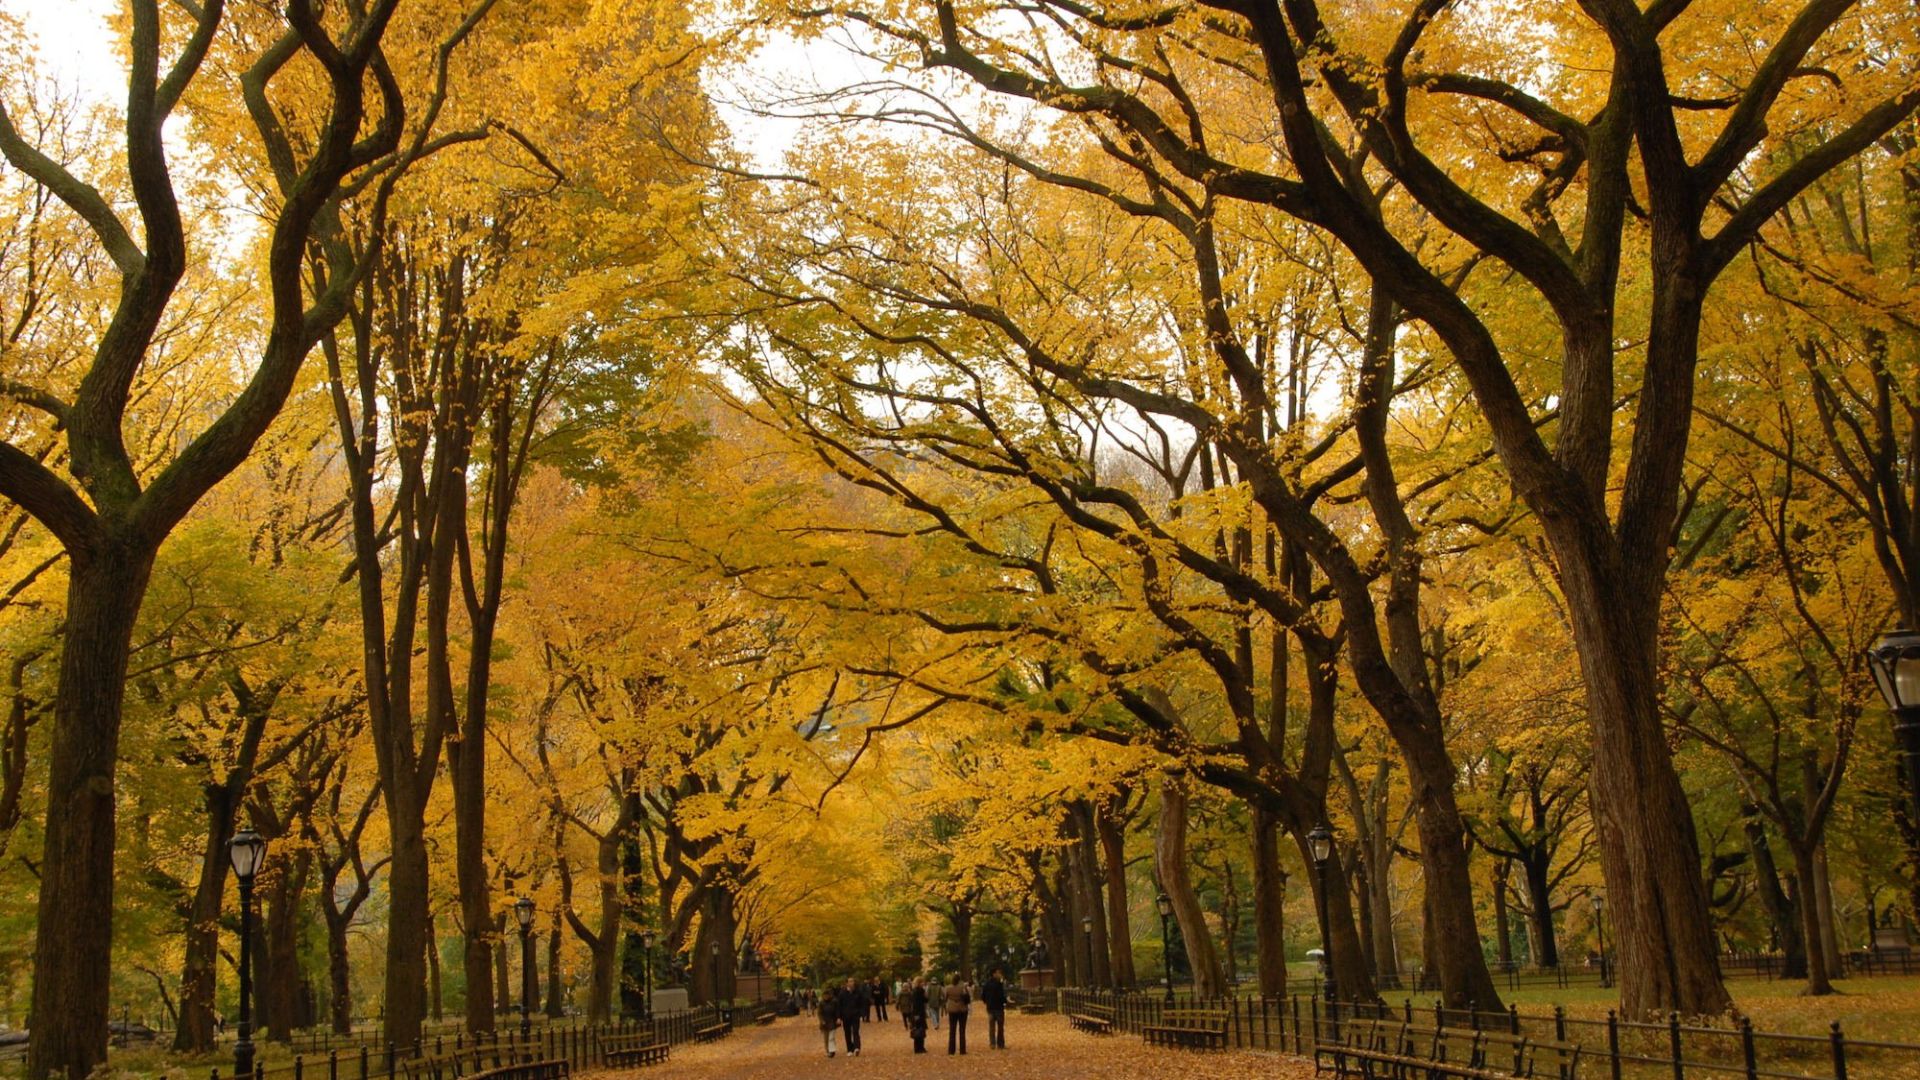 A Group Of People Walking On A Path Through A Park With Yellow Trees